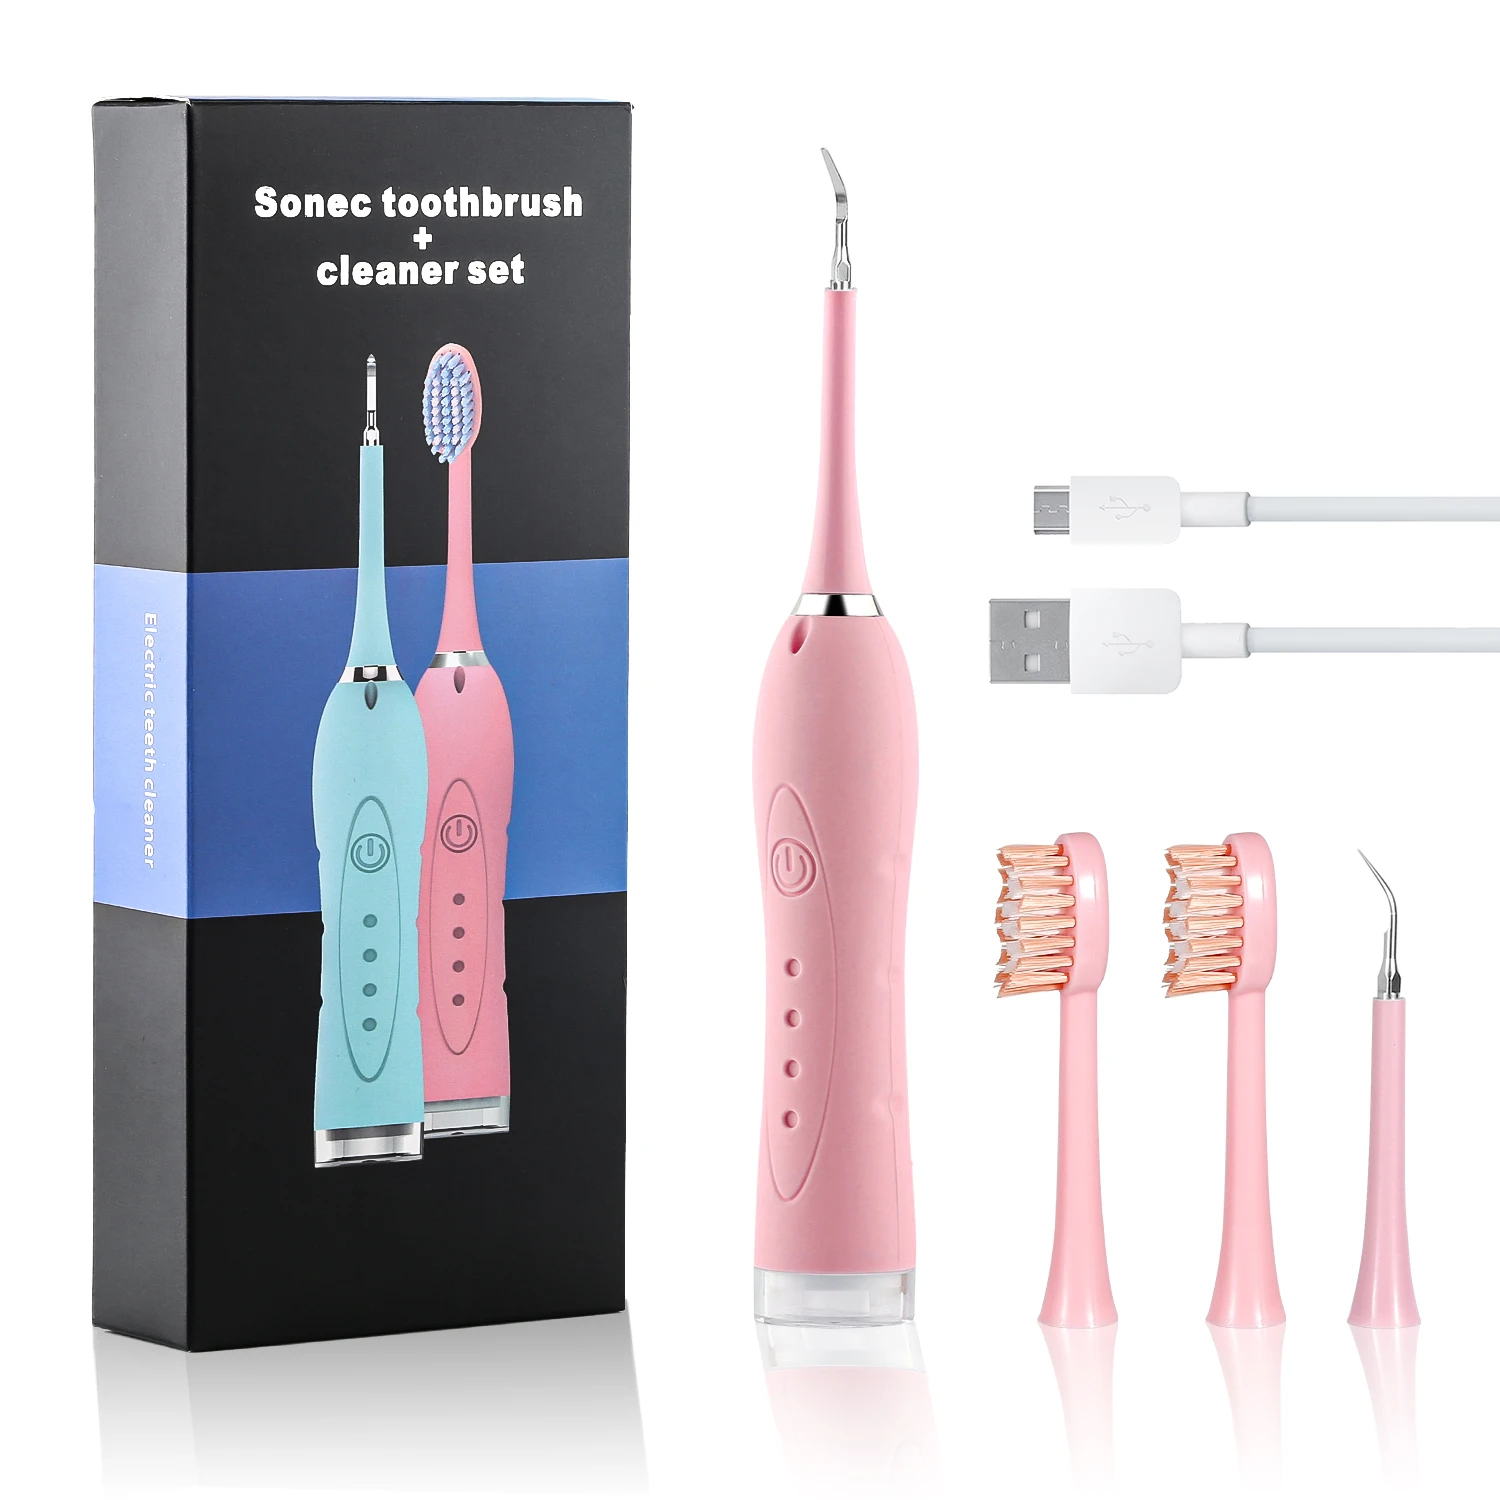 

2 in 1 Electric Toothbrush Sonic Dental Plaque Cleaning Teeth Cleaner Kit Replaceable Toothbrush for Cleaning Tartar